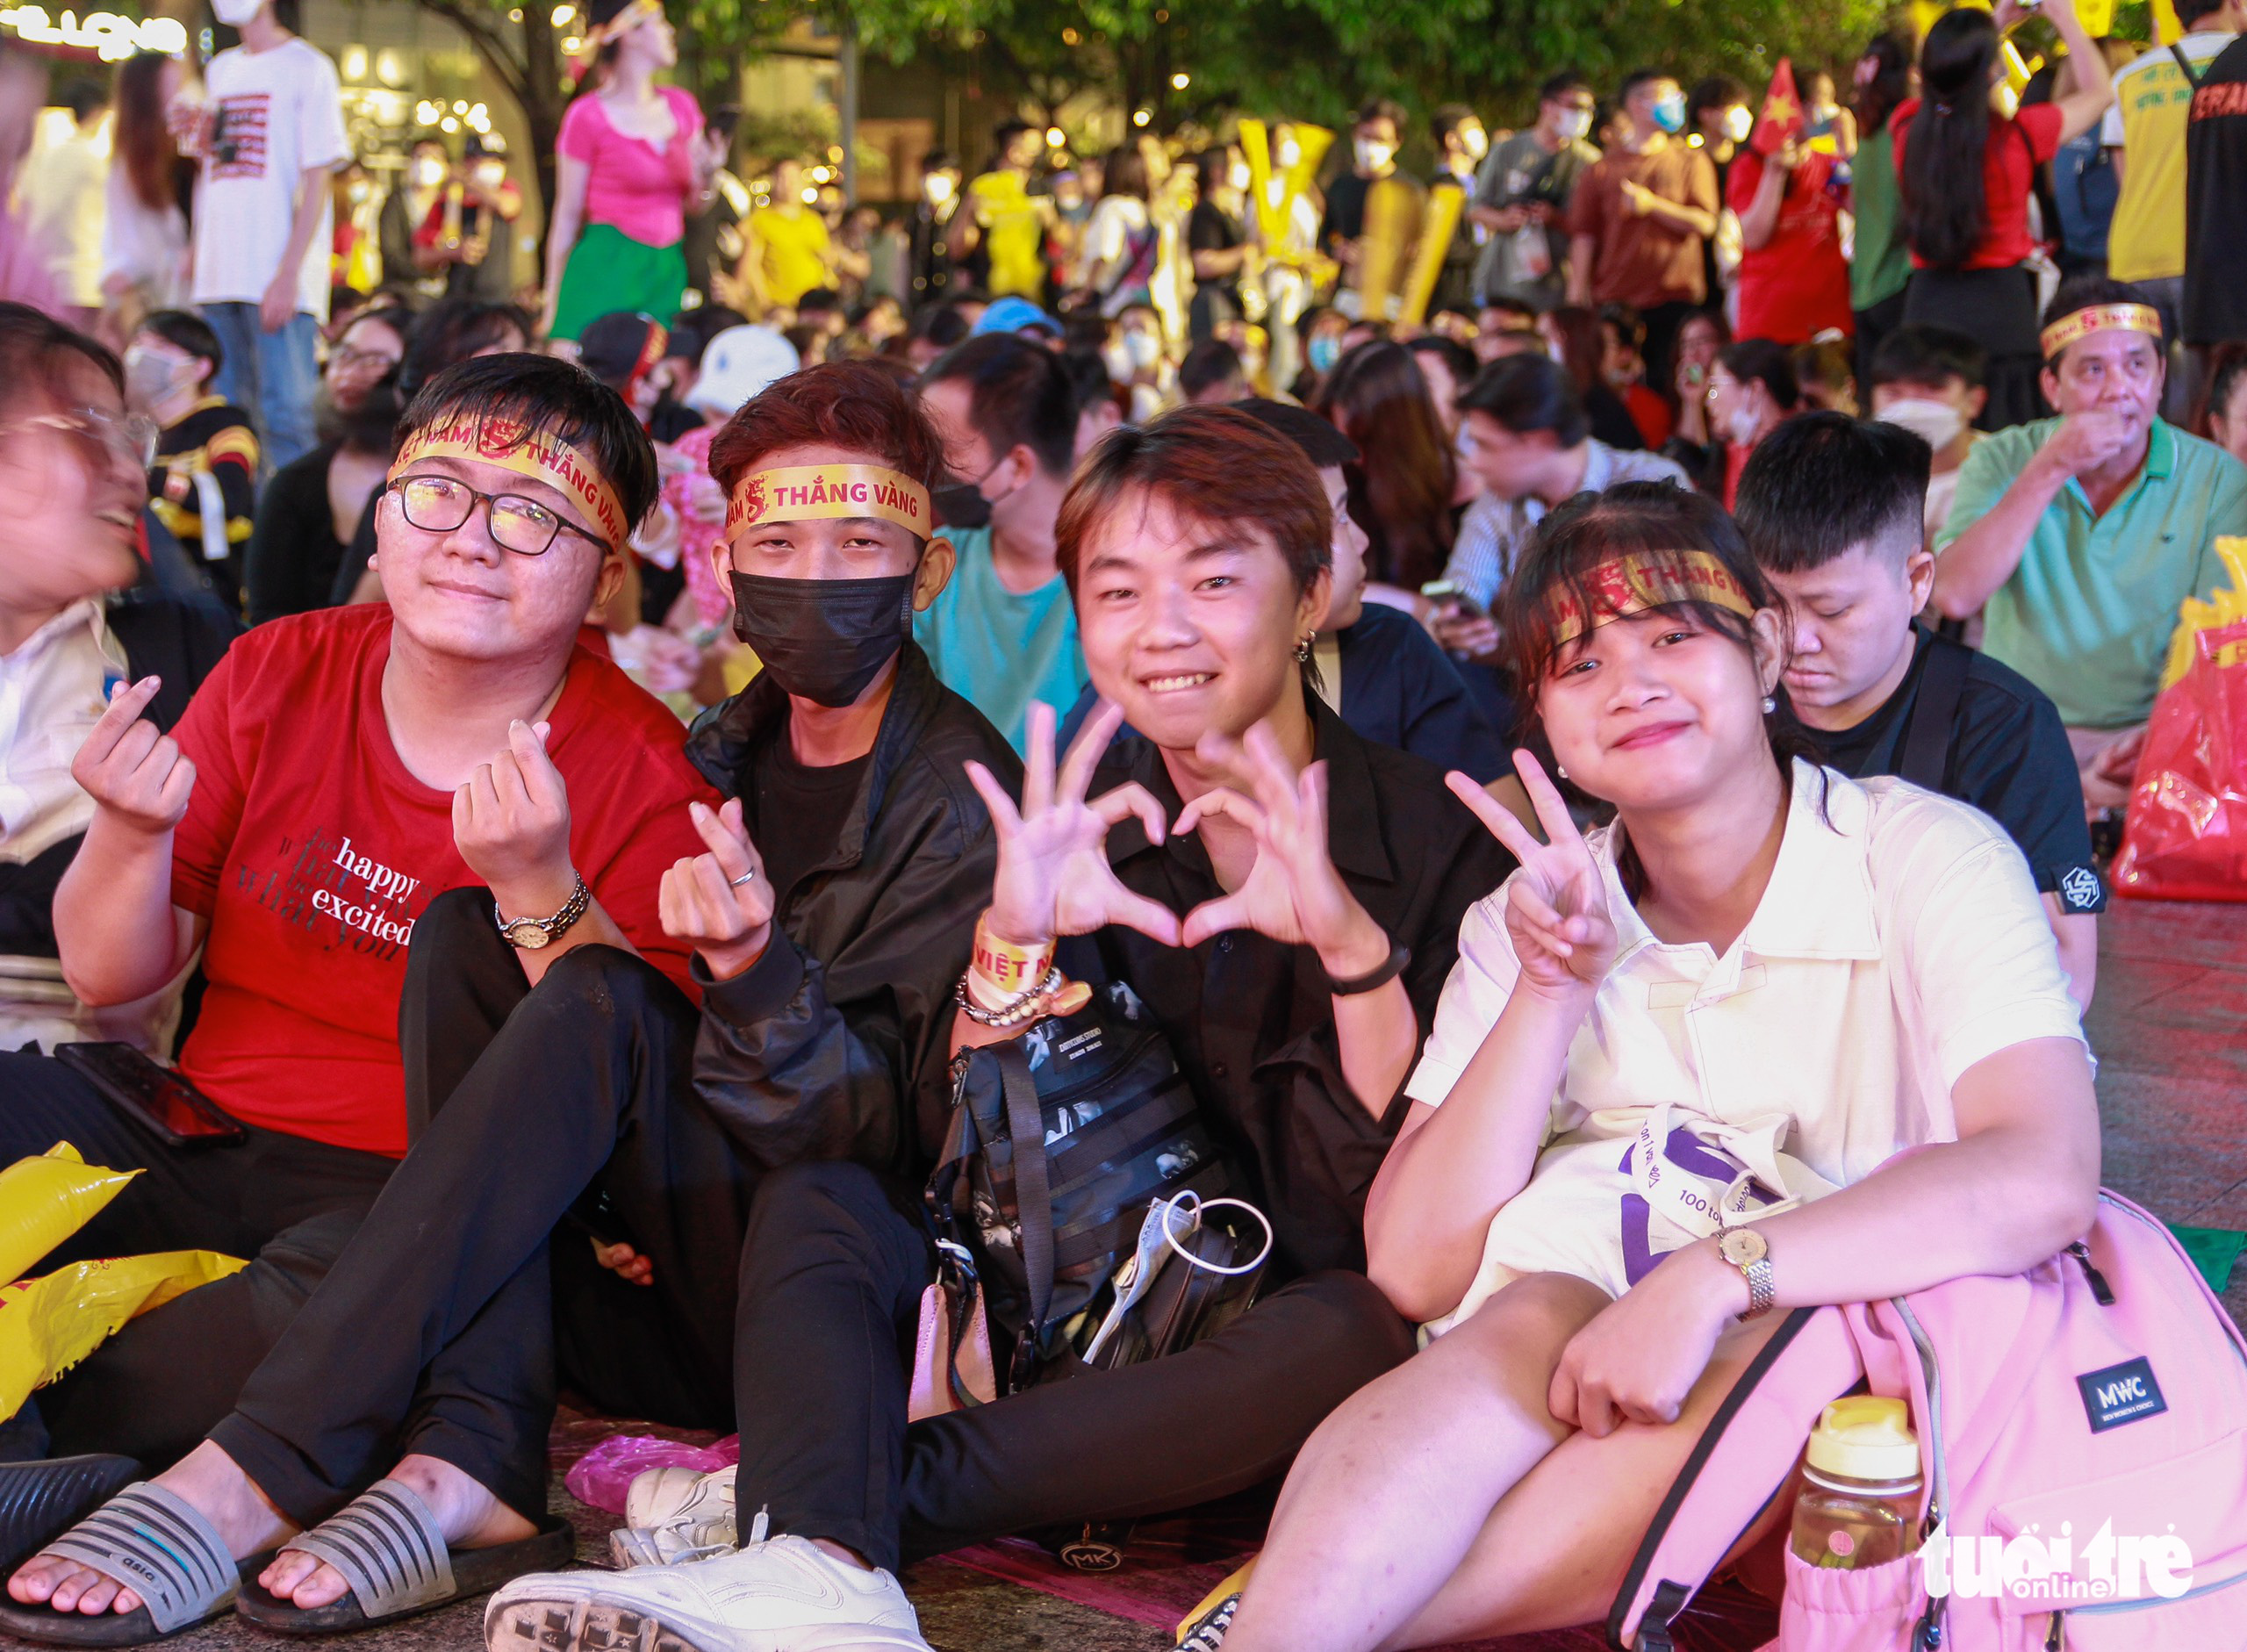 Fans pose for a photo during the Vietnam - Malaysia men’s football semifinal at the 31st Southeast Asian (SEA) Games at the Nguyen Hue Pedestrian Street in District 1, Ho Chi Minh City, May 19, 2022. Photo: Phuong Quyen / Tuoi Tre